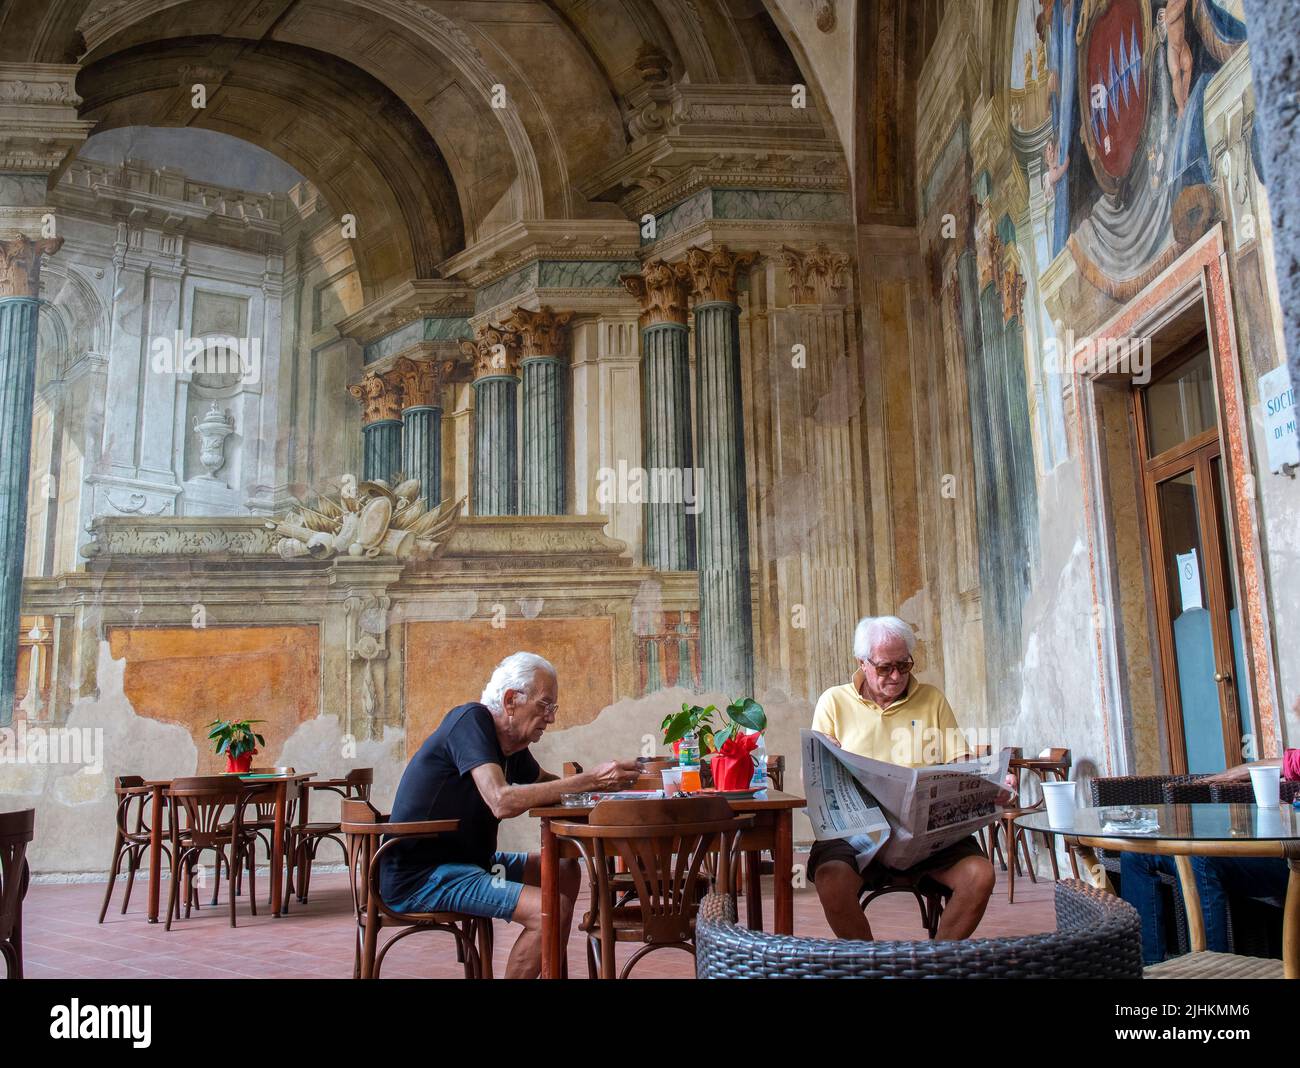 Italian gentlemen relax in Sedile Dominova, a historic building with with original frescos now serving as a working men's club, Sorrento, Italy. Stock Photo